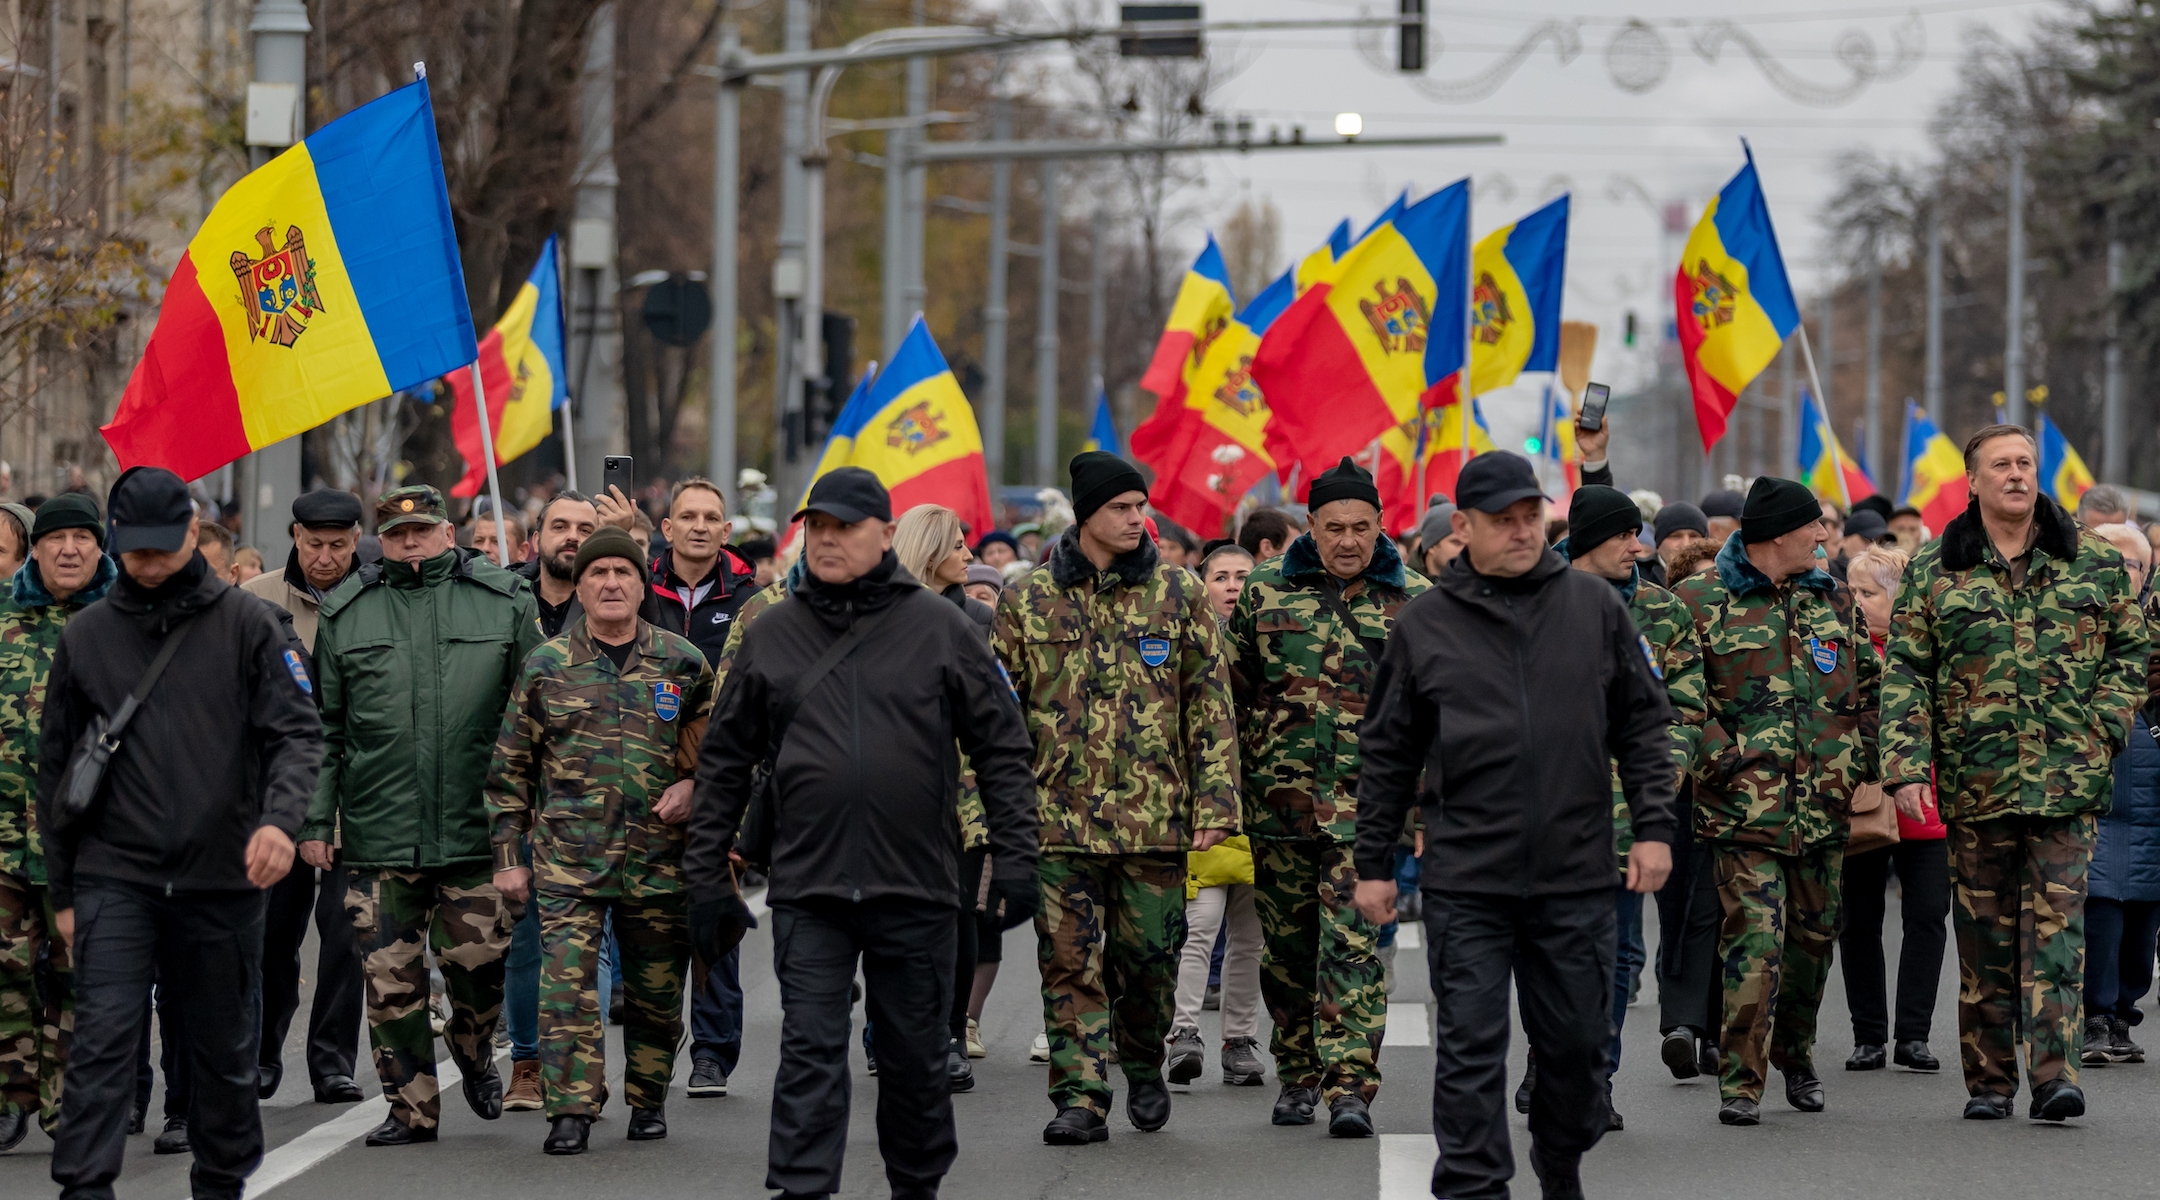 Demonstrators in Chisinau protest the Moldovan government, Nov 13, 2022. Shor has been involved in organizing ongoing protests. (Vudi Xhymshiti/Anadolu Agency via Getty Images)